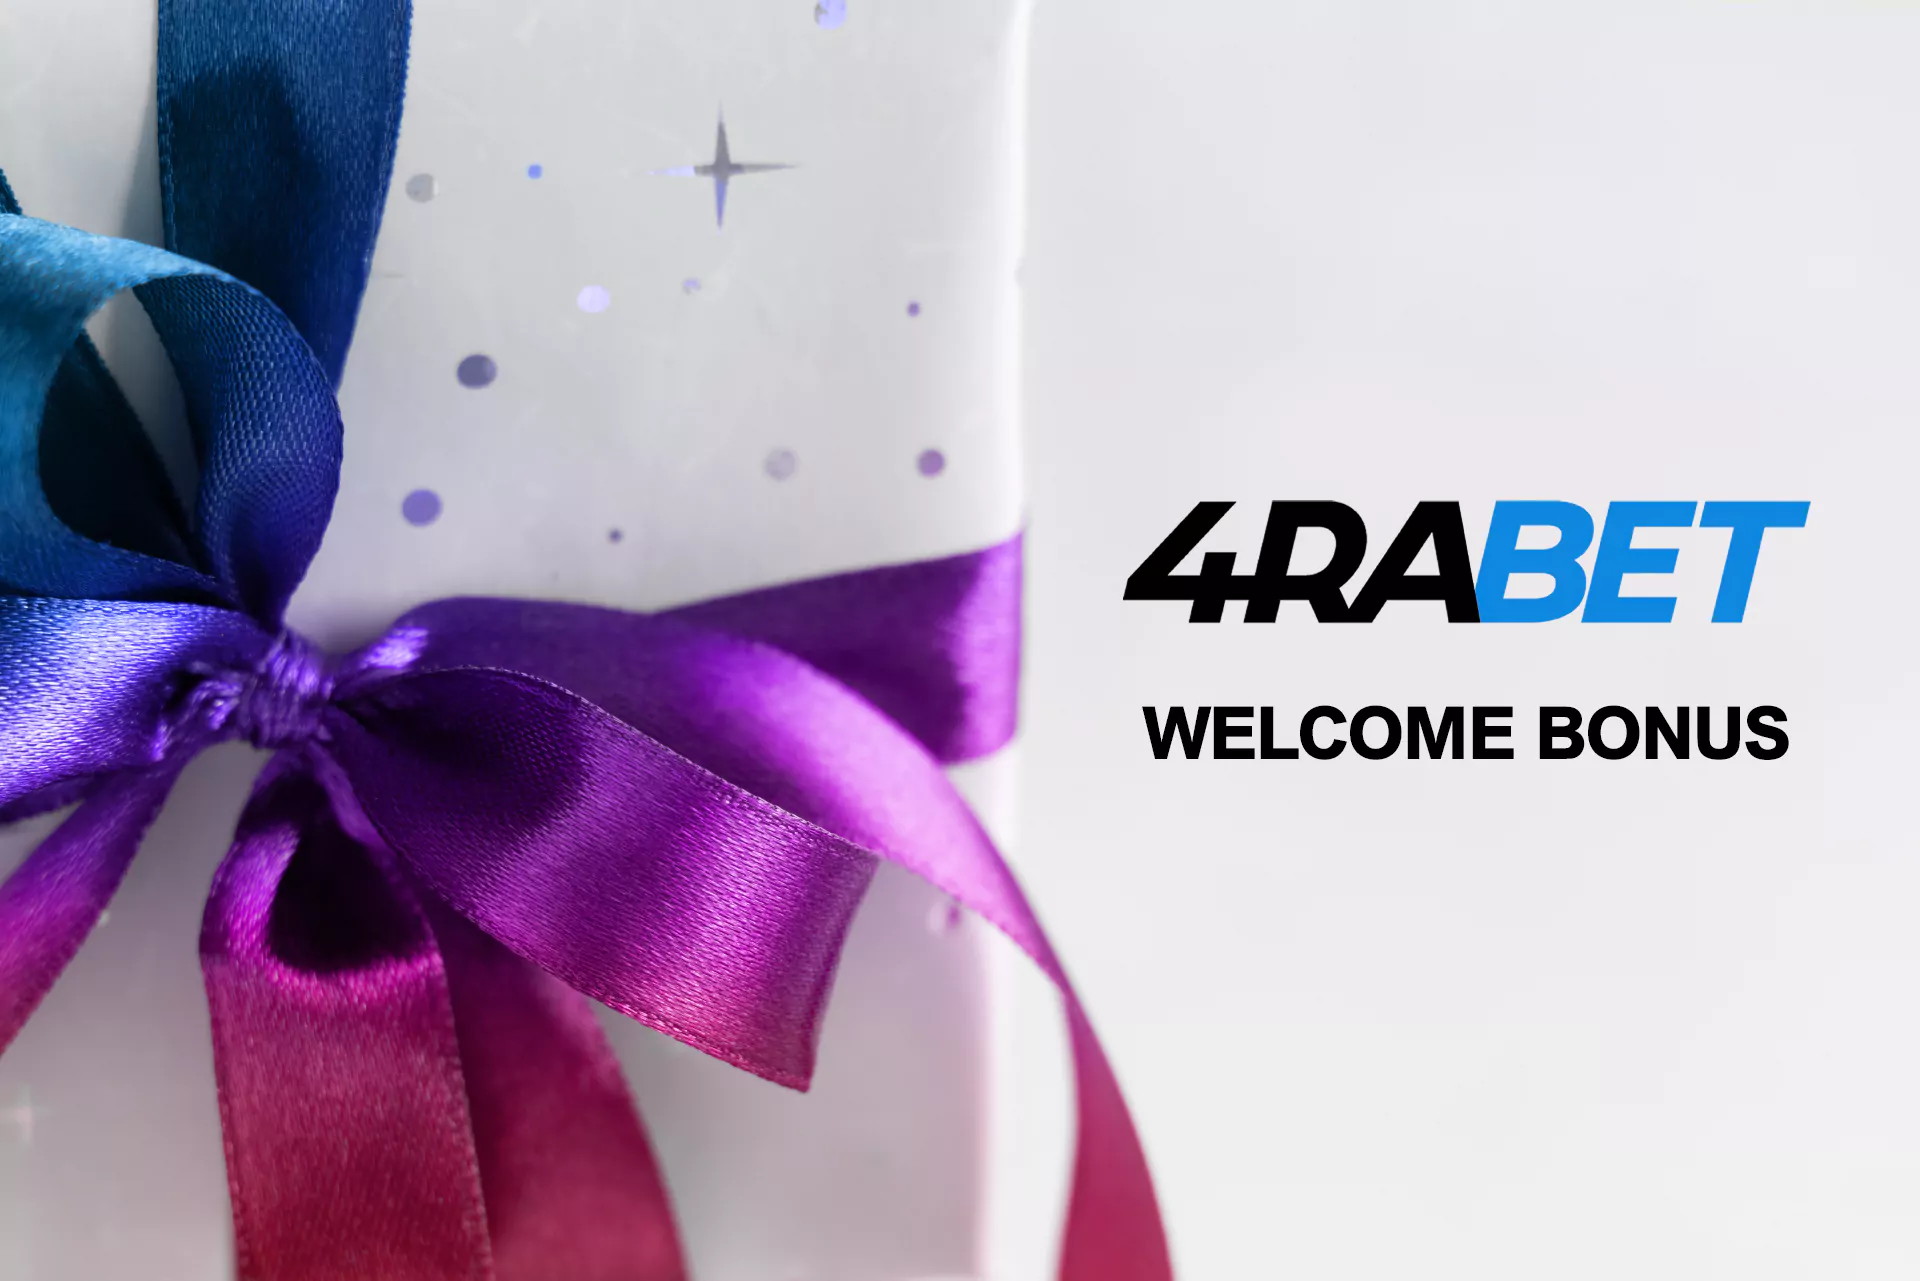 If you are a new user on 4rabet, claim the welcome bonus during registration.